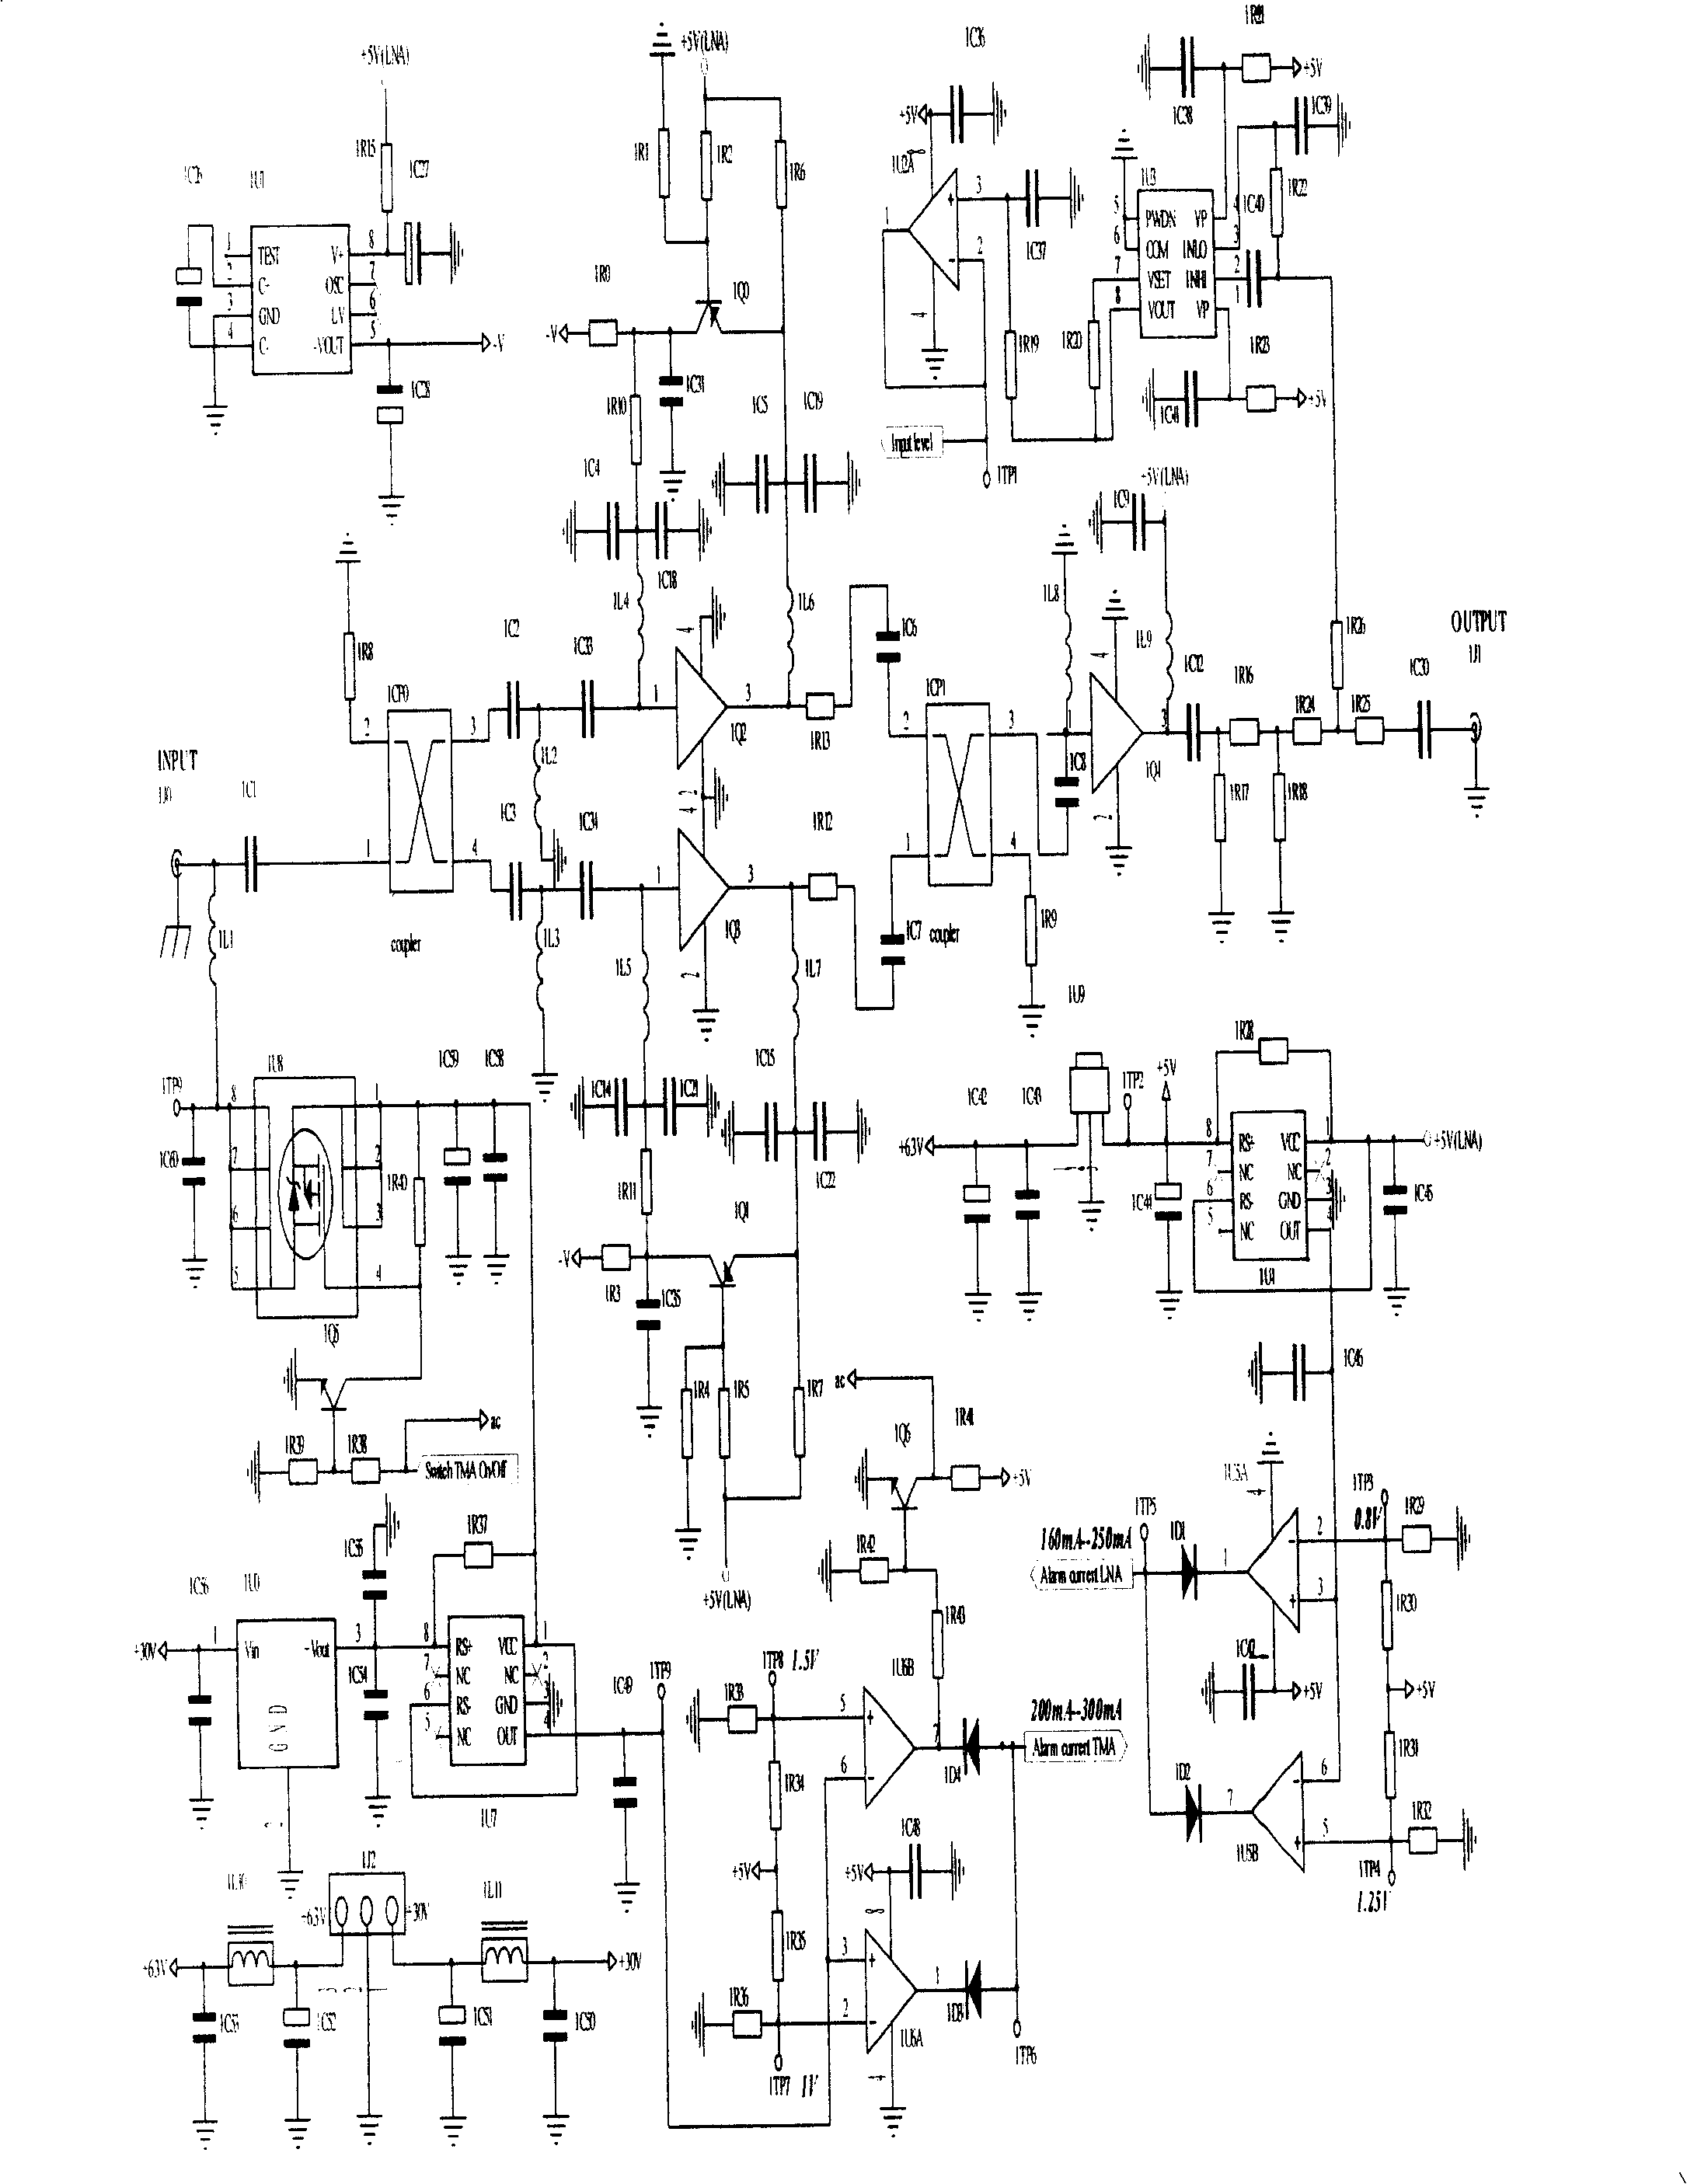 Power intensifier system for cofrequency transmitting of digital television